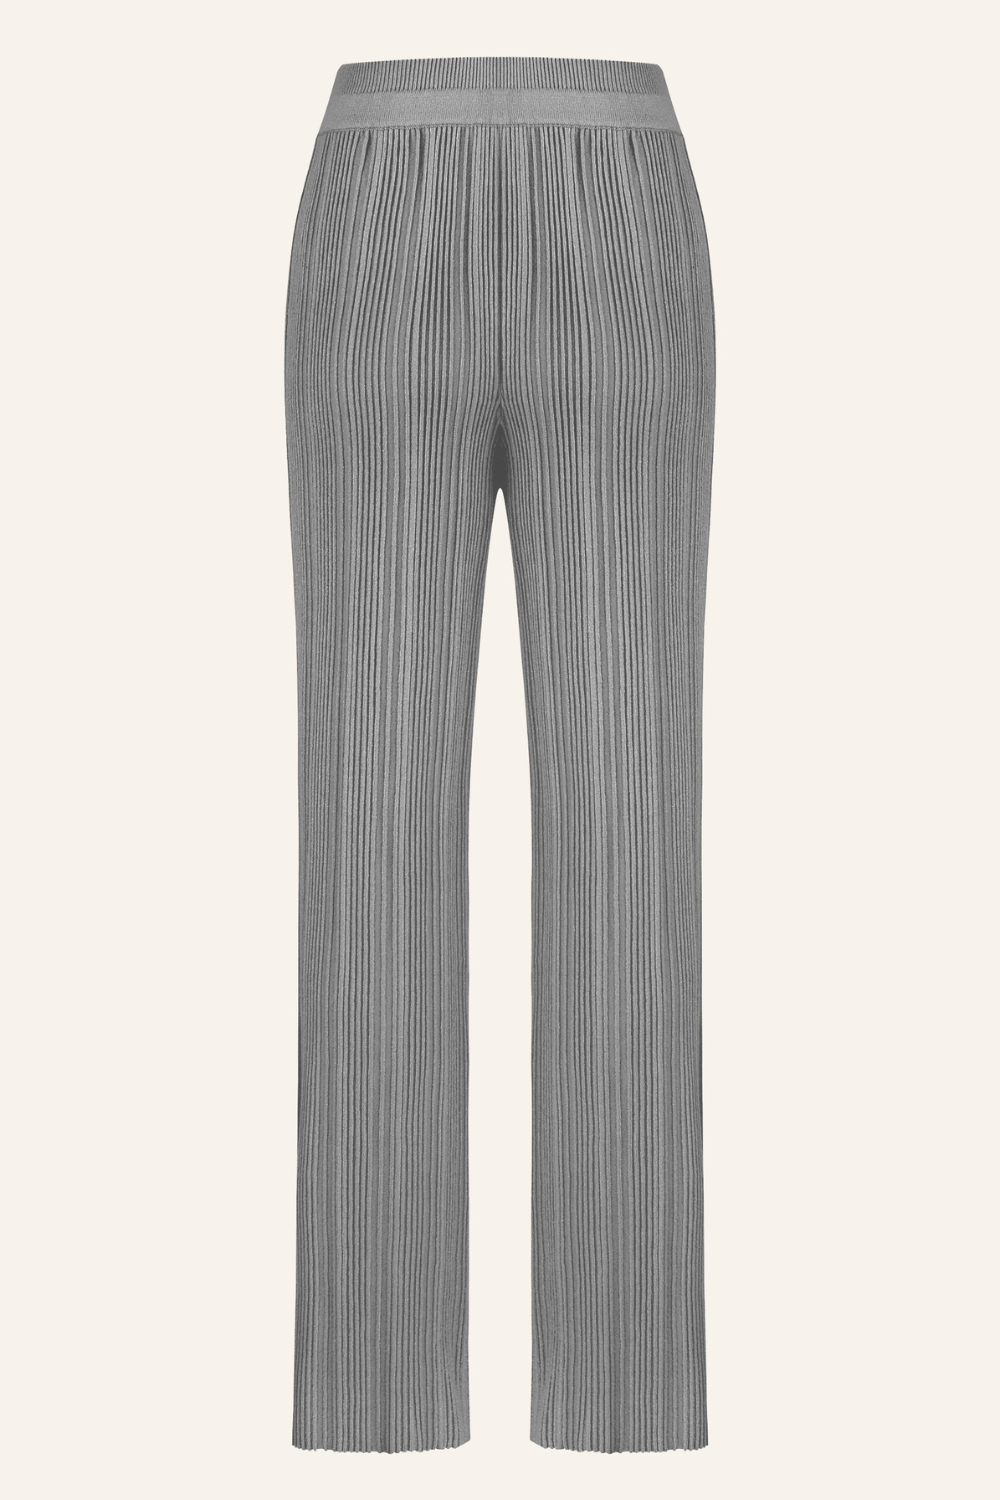 Knitted pants, gray, (T.Mosca), BOL24-01